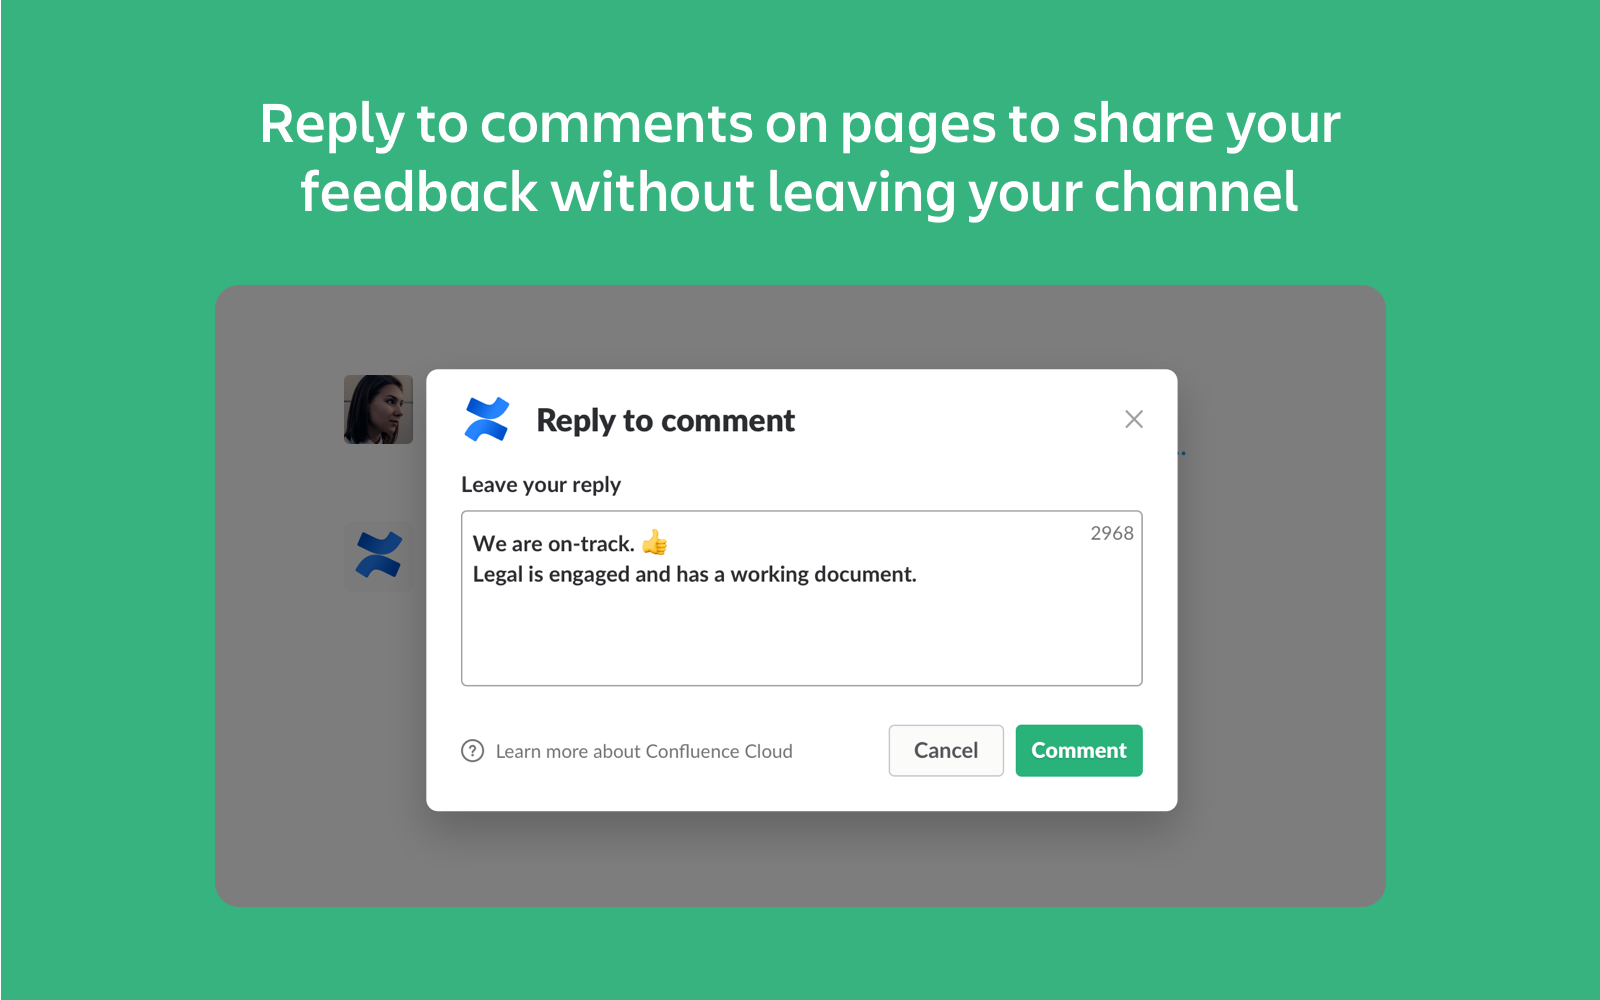 Reply to comments on Confluence pages without leaving Slack channel